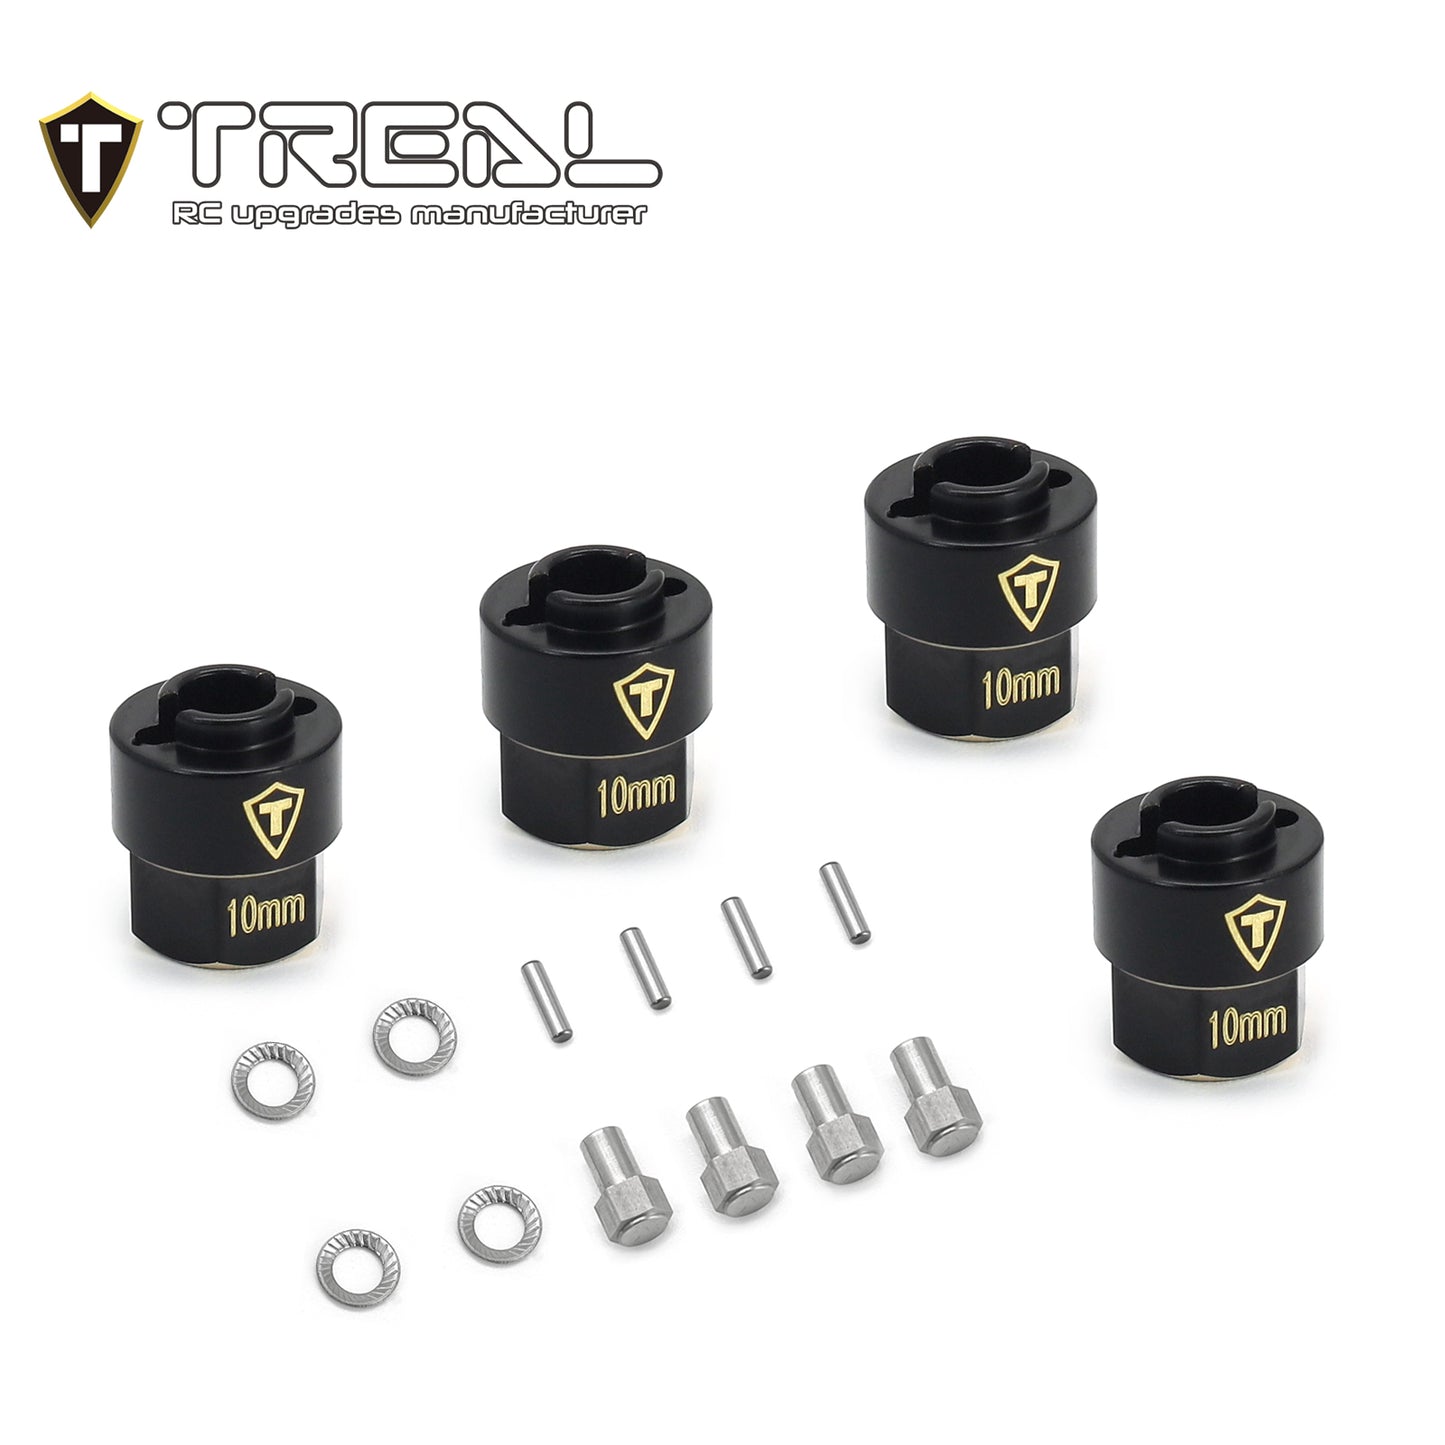 TREAL Brass Extended Wheel Hubs 7mm*10mm Hex, 3g/pc (4pcs) for 1/18 TRX4M Defender and Bronco (Black)